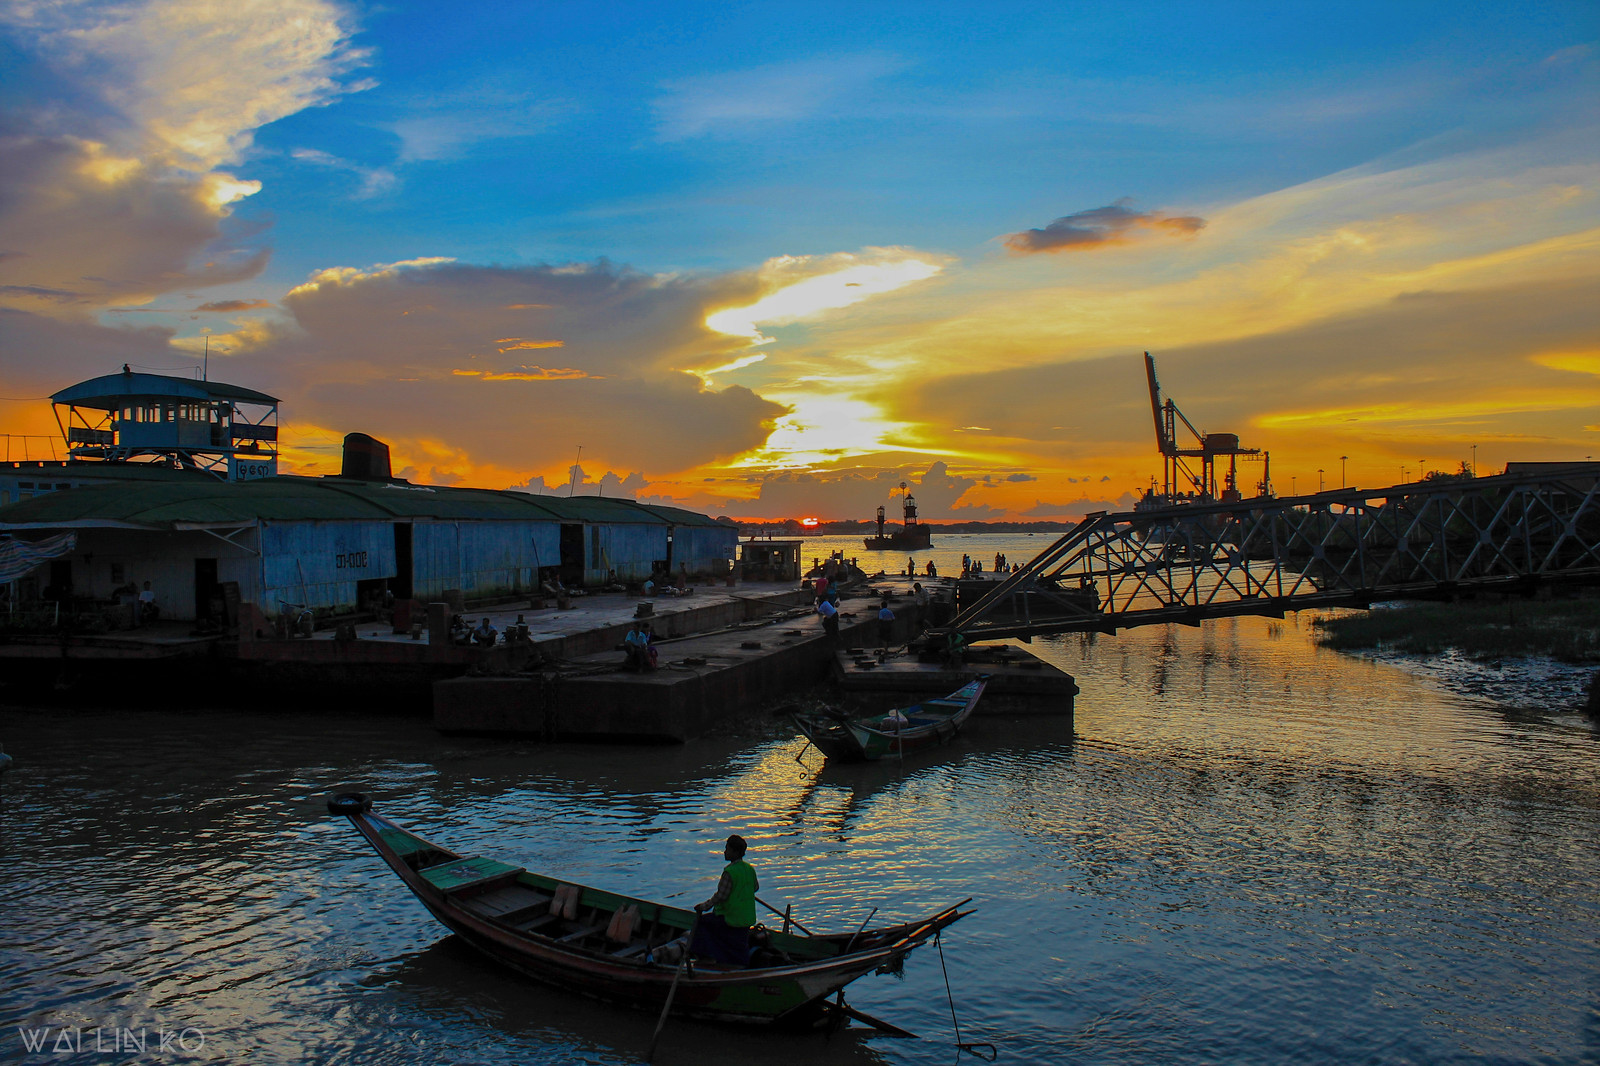 Sunset at Botahtaung Harbour